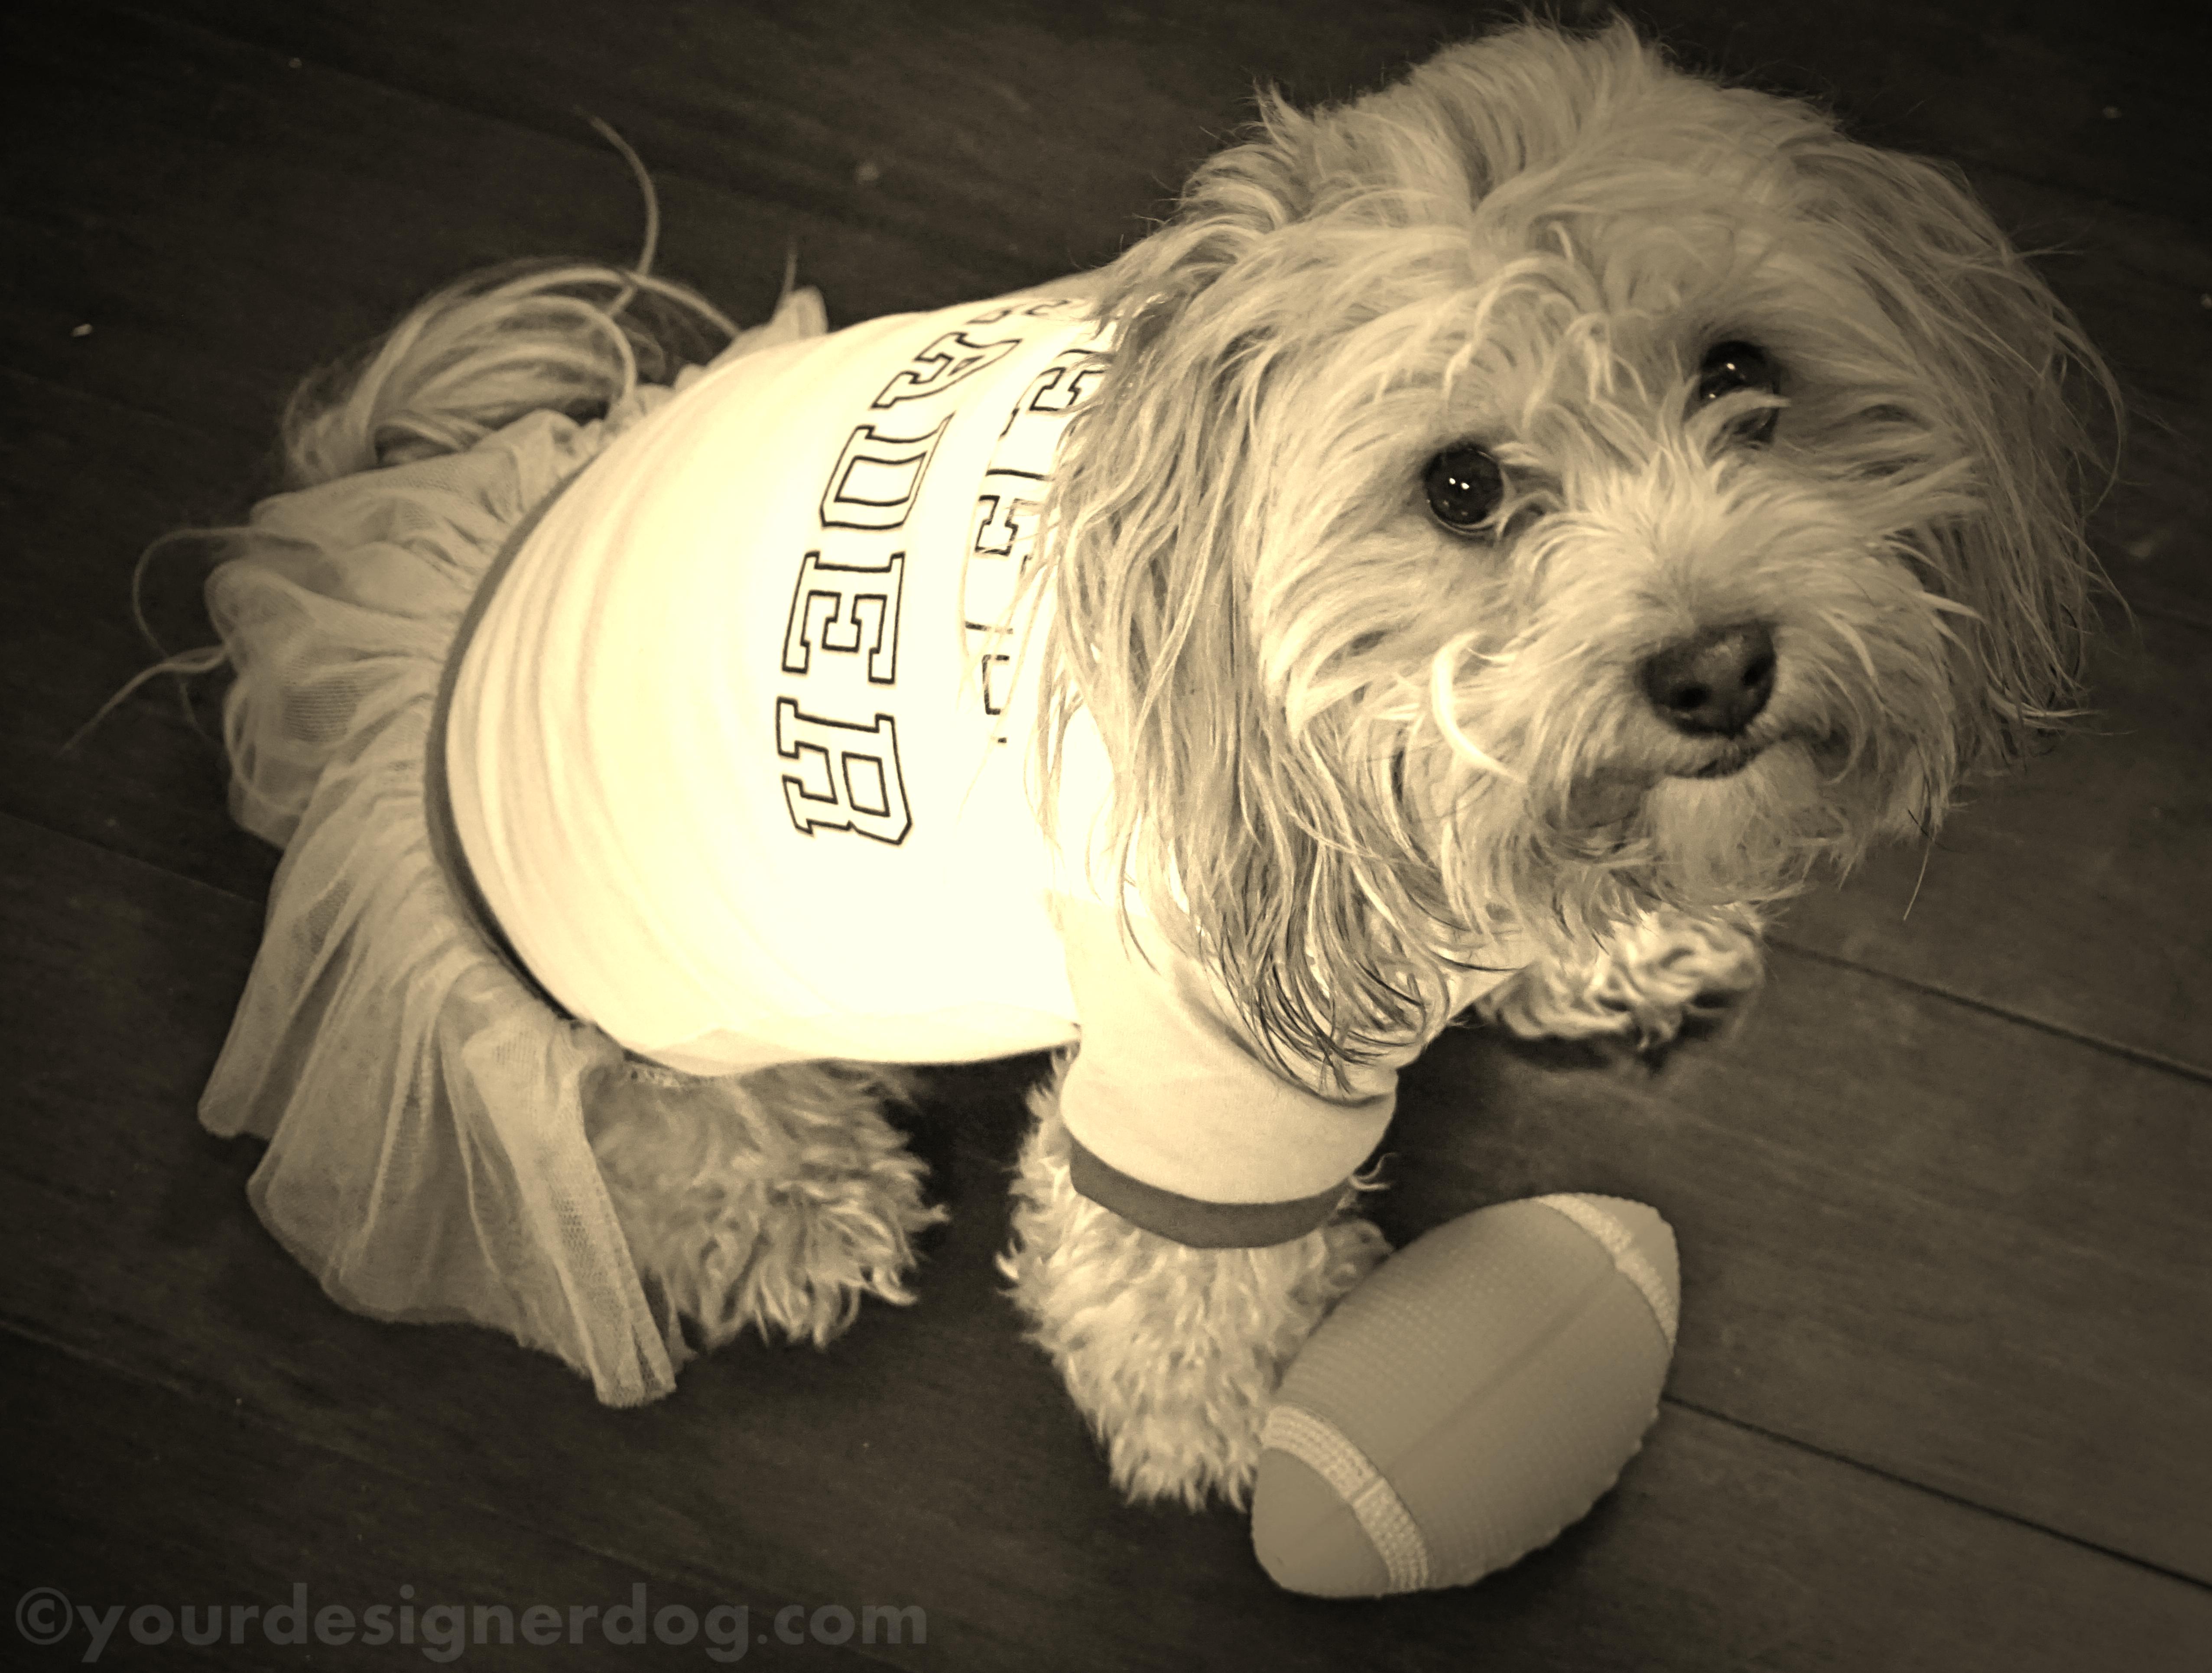 dogs, designer dogs, yorkipoo, yorkie poo, sepia photography, football, cheerleader, puppy bowl, super bowl